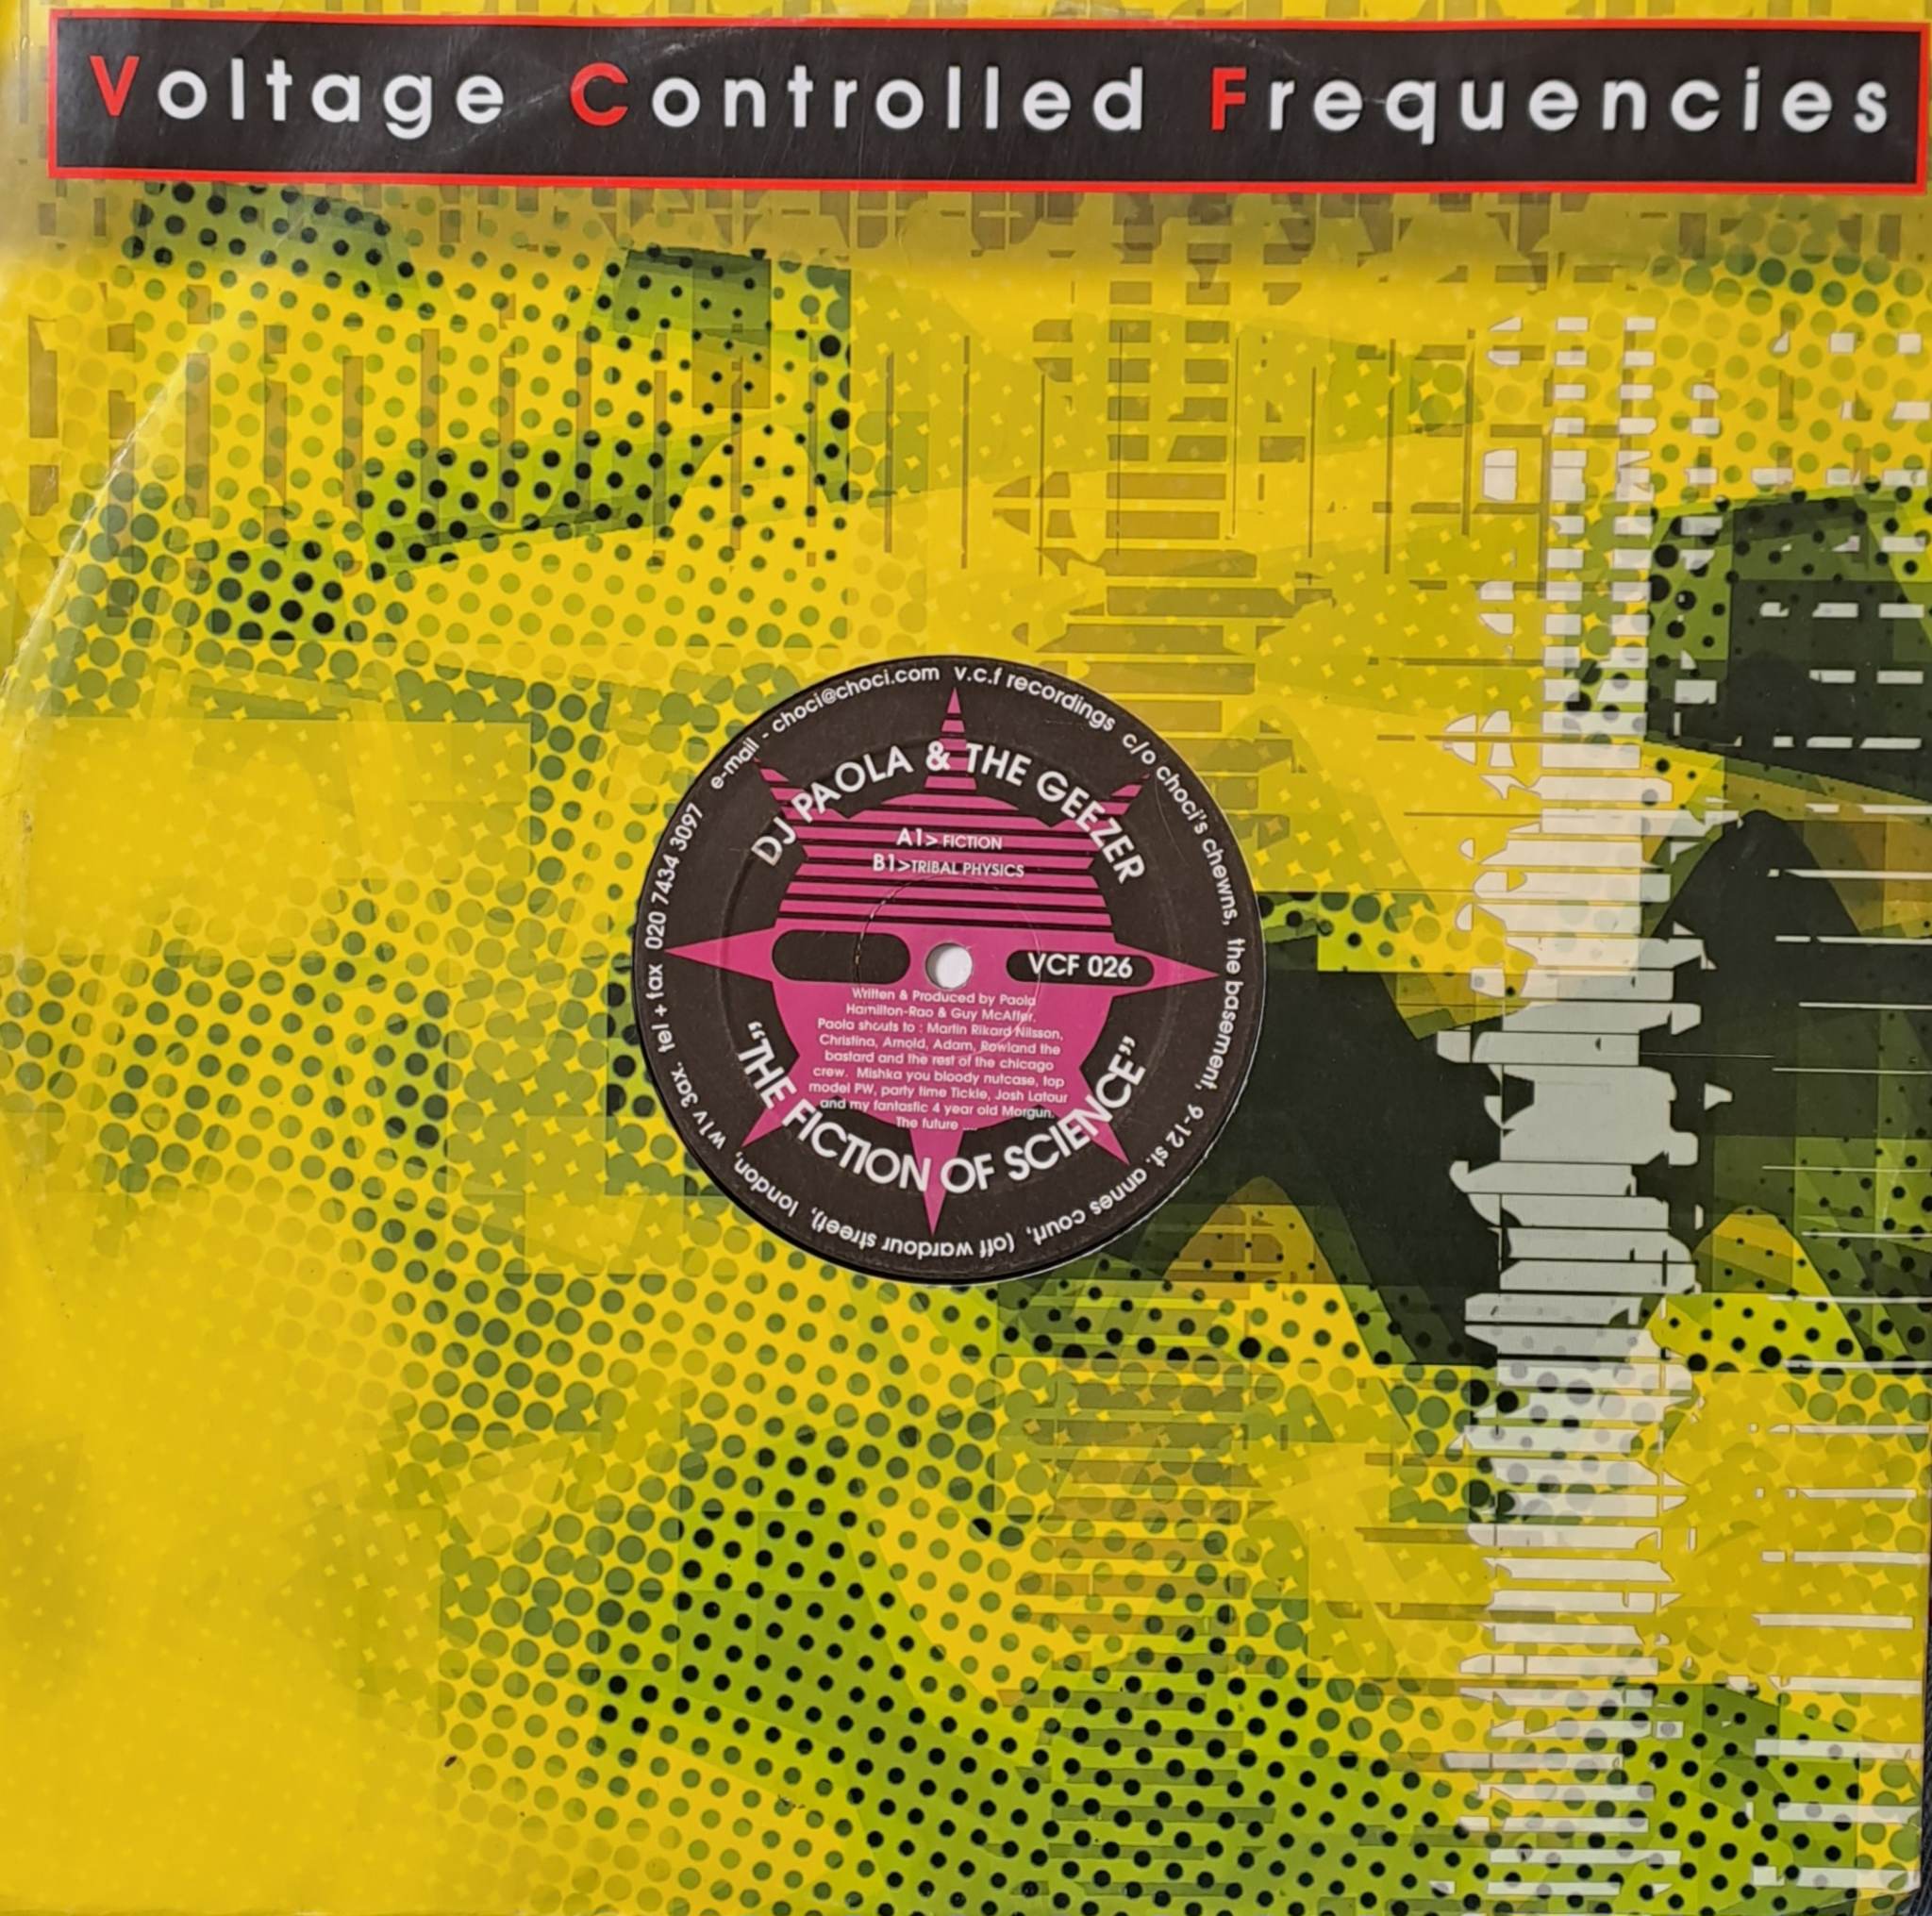 Voltage Controlled Frequencies 026 - vinyle Trance